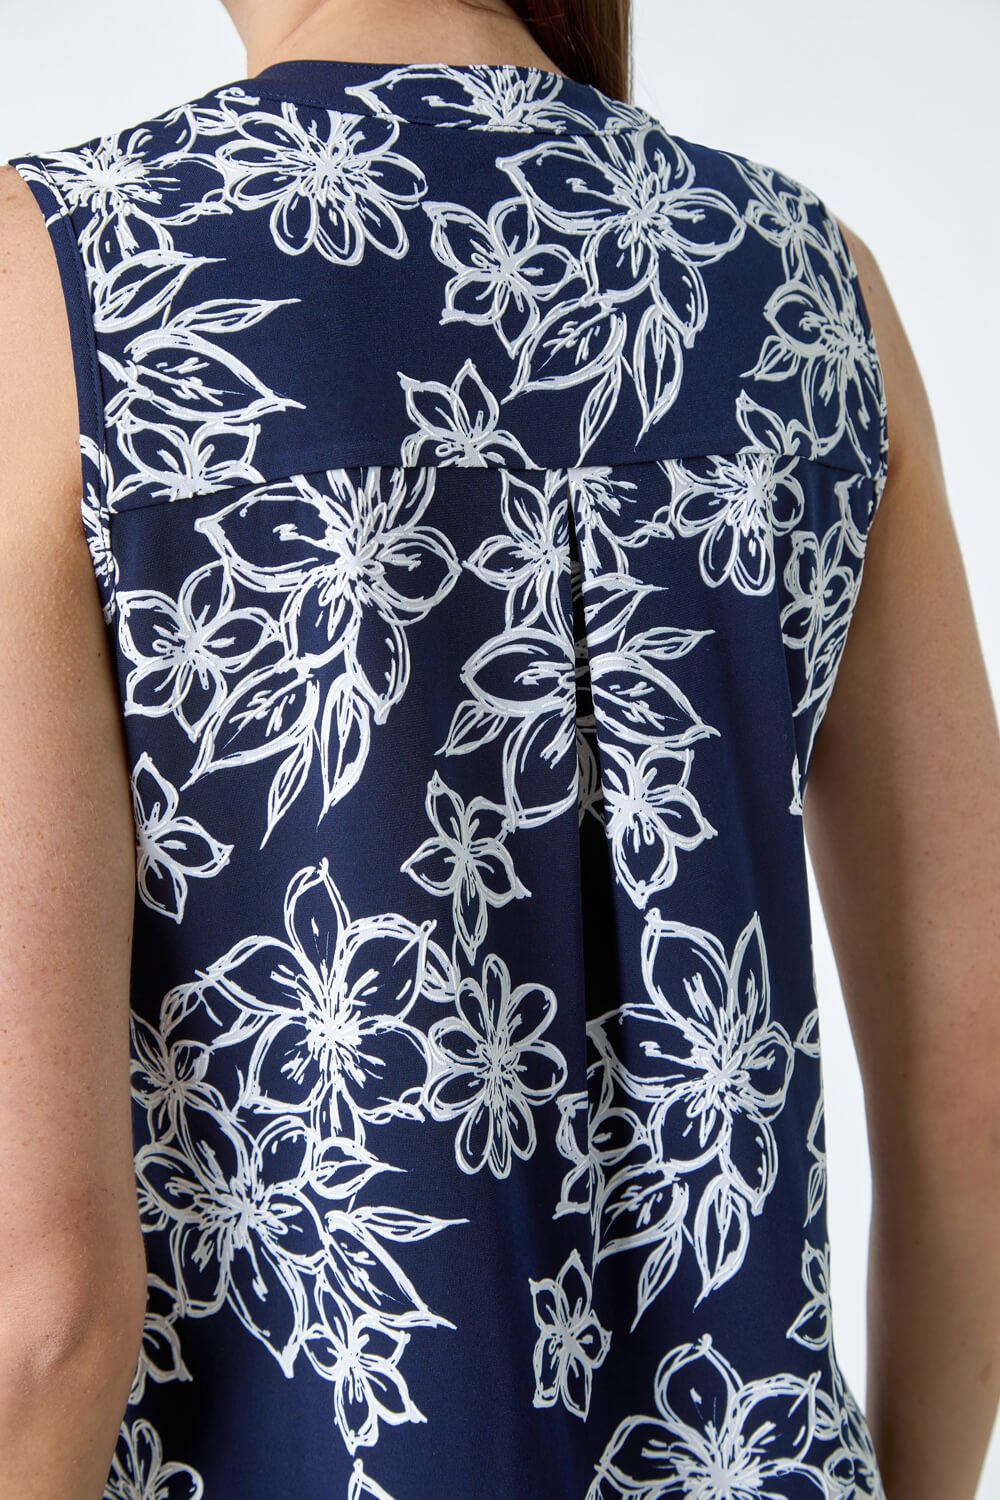 Navy  Sleeveless Floral Print Stretch Top, Image 5 of 5